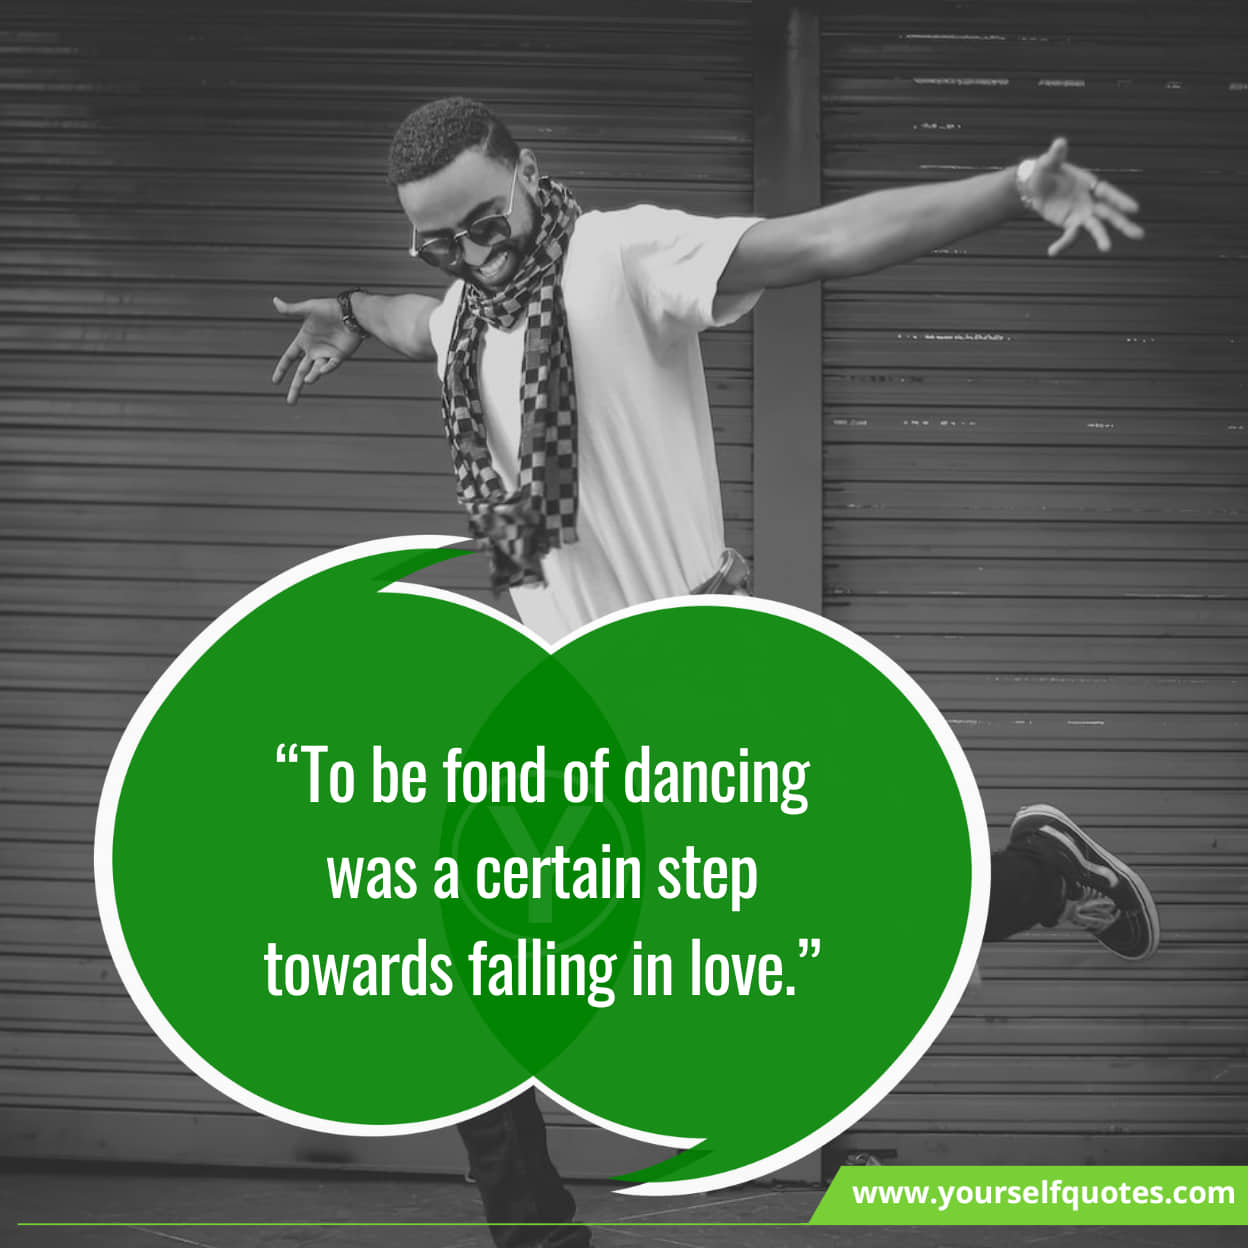 Inspirational Best Quotes On Dance